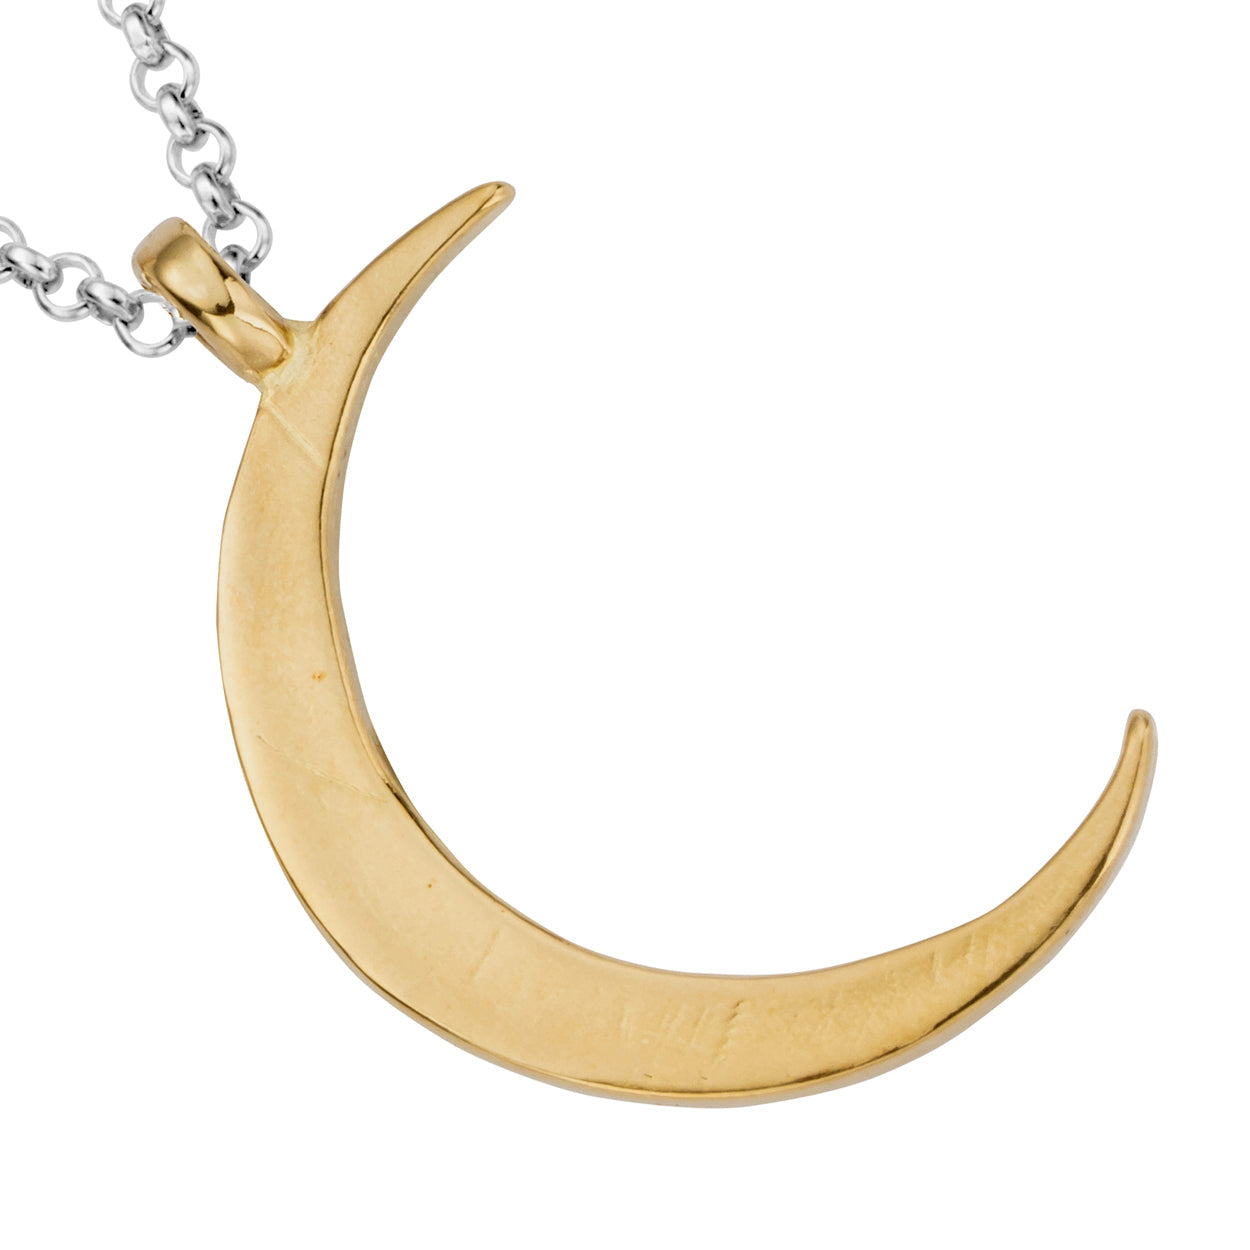 Silver & Gold Large Crescent Moon Necklace